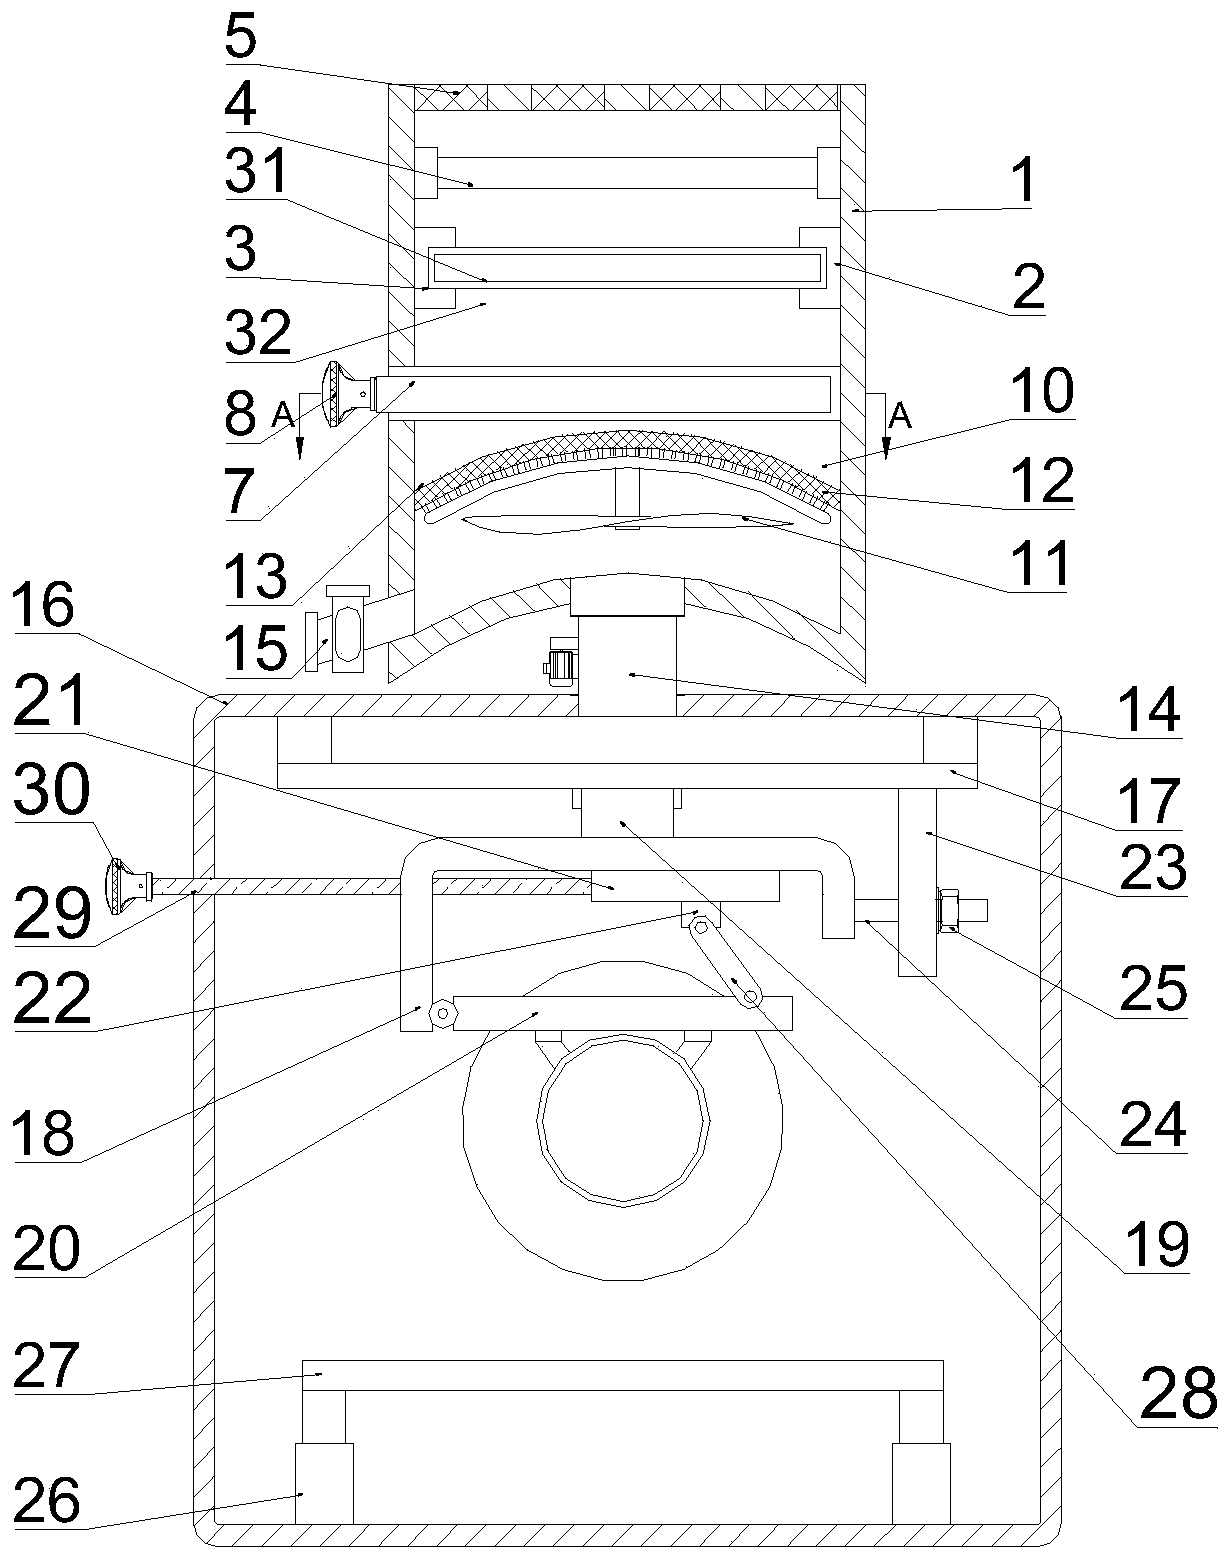 Screw-drive adjusting type multi-angle cutting device for range hood processing